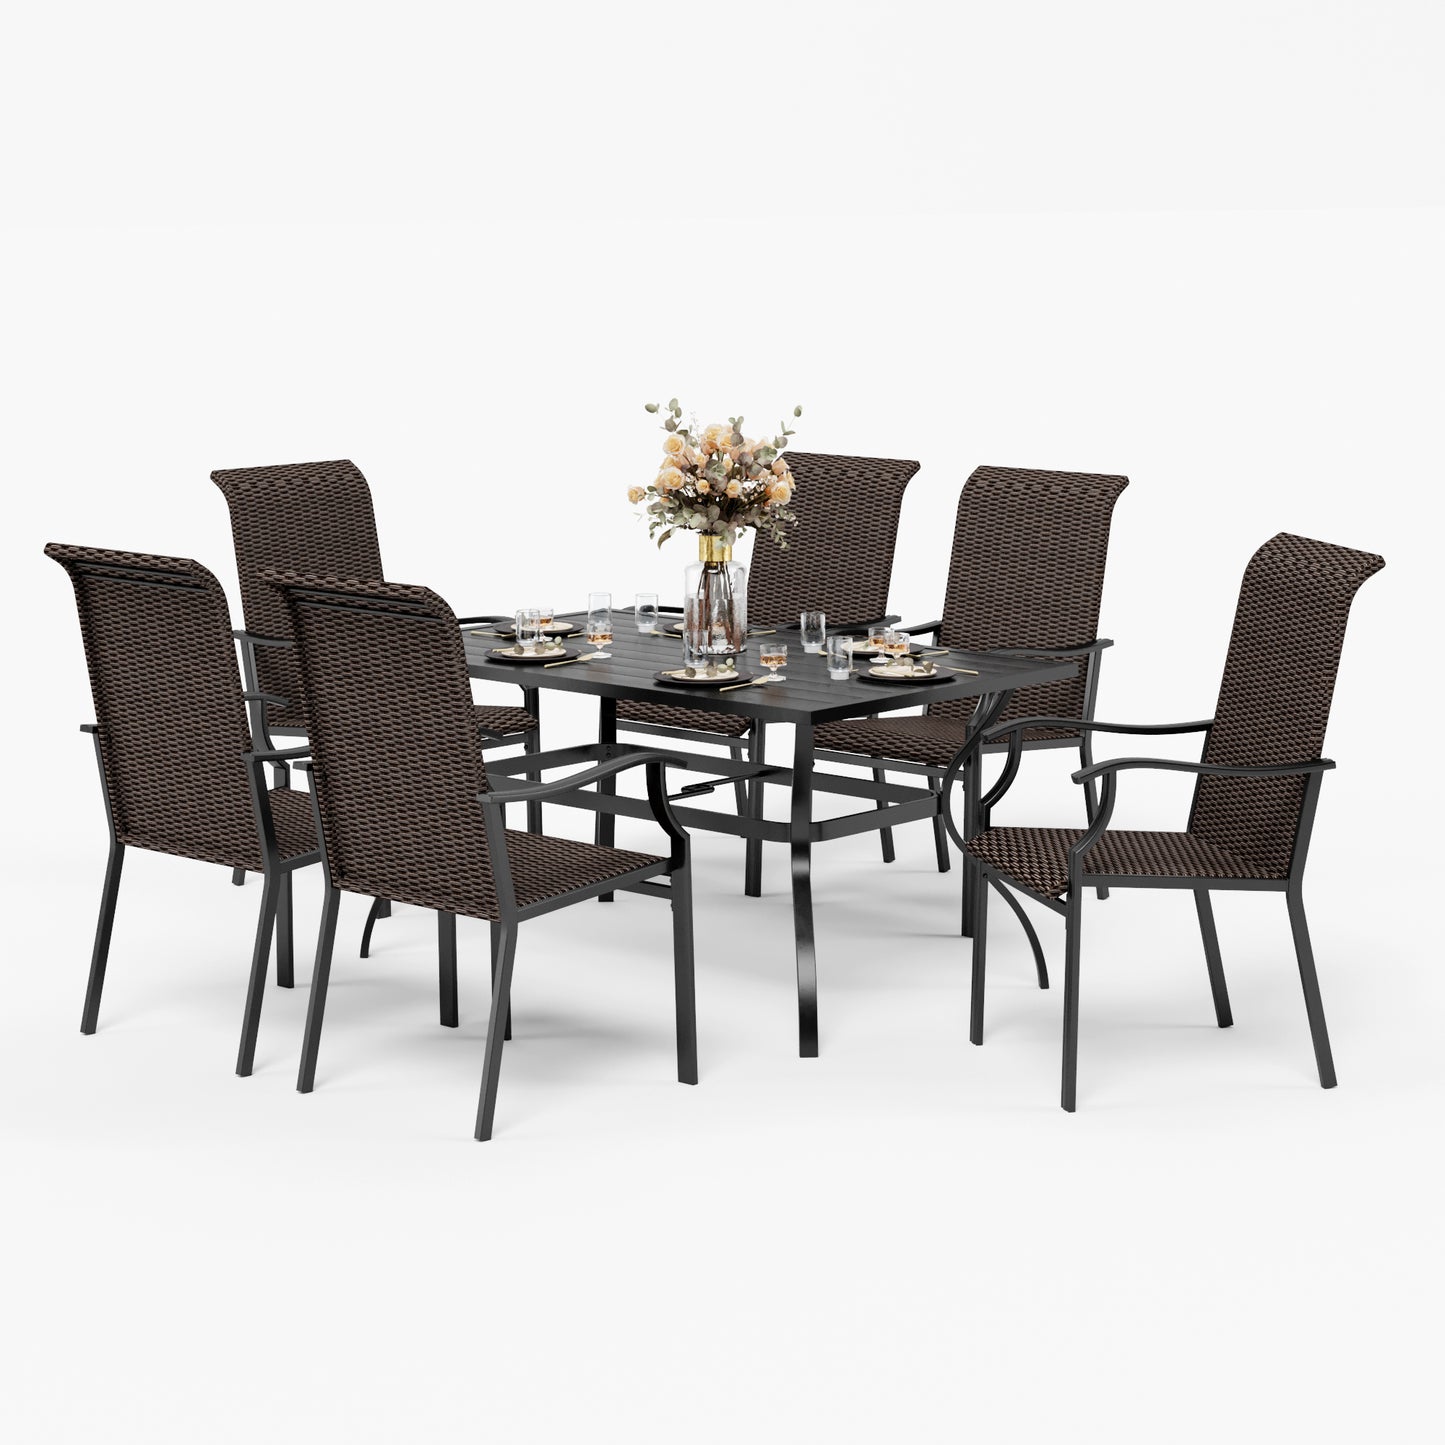 6 Seater Patio Set Metal Table and Outdoor Wicker Dining Chairs